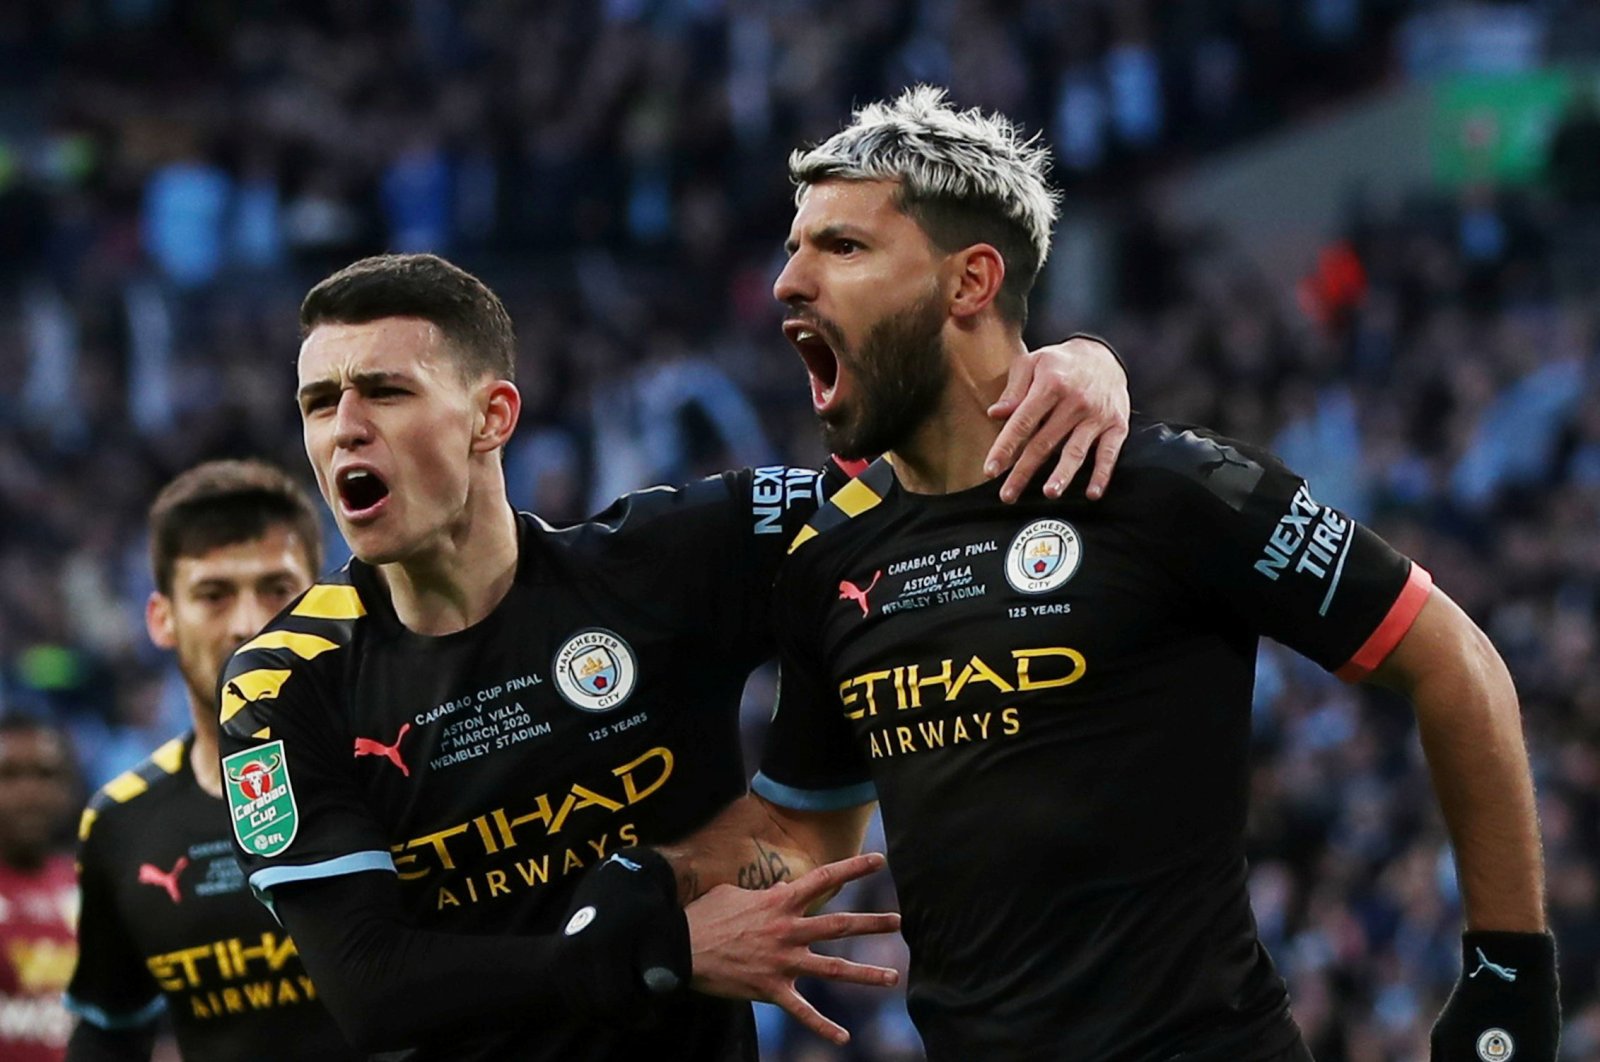 Manchester City's Sergio Aguero (R) and Phil Foden celebrate scoring their first goal against Aston Villa in London, March 1, 2020. (Reuters Photo)